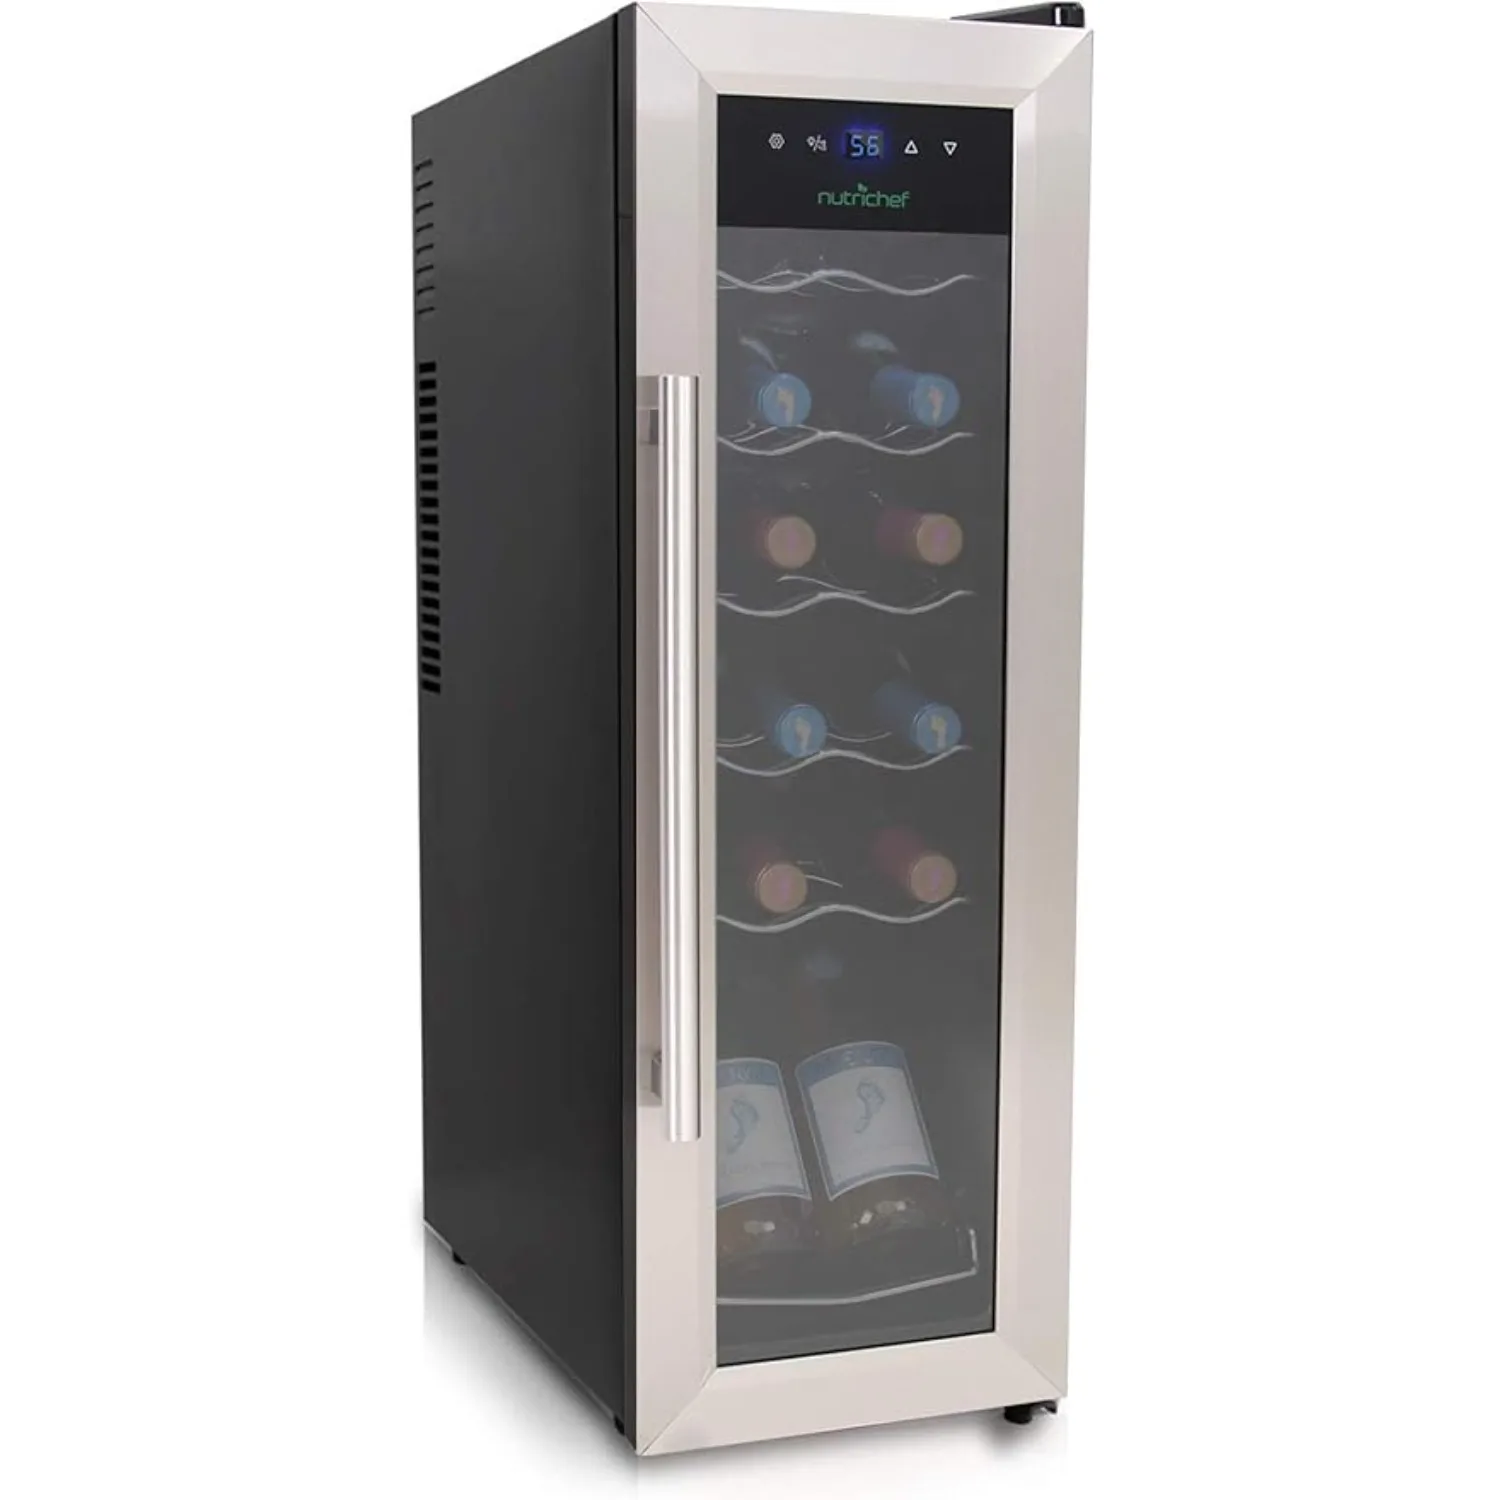 

12 Bottle Cooler Refrigerator White and Red Countertop Chiller, Freestanding Compact Mini Wine Fridge with Digital Control